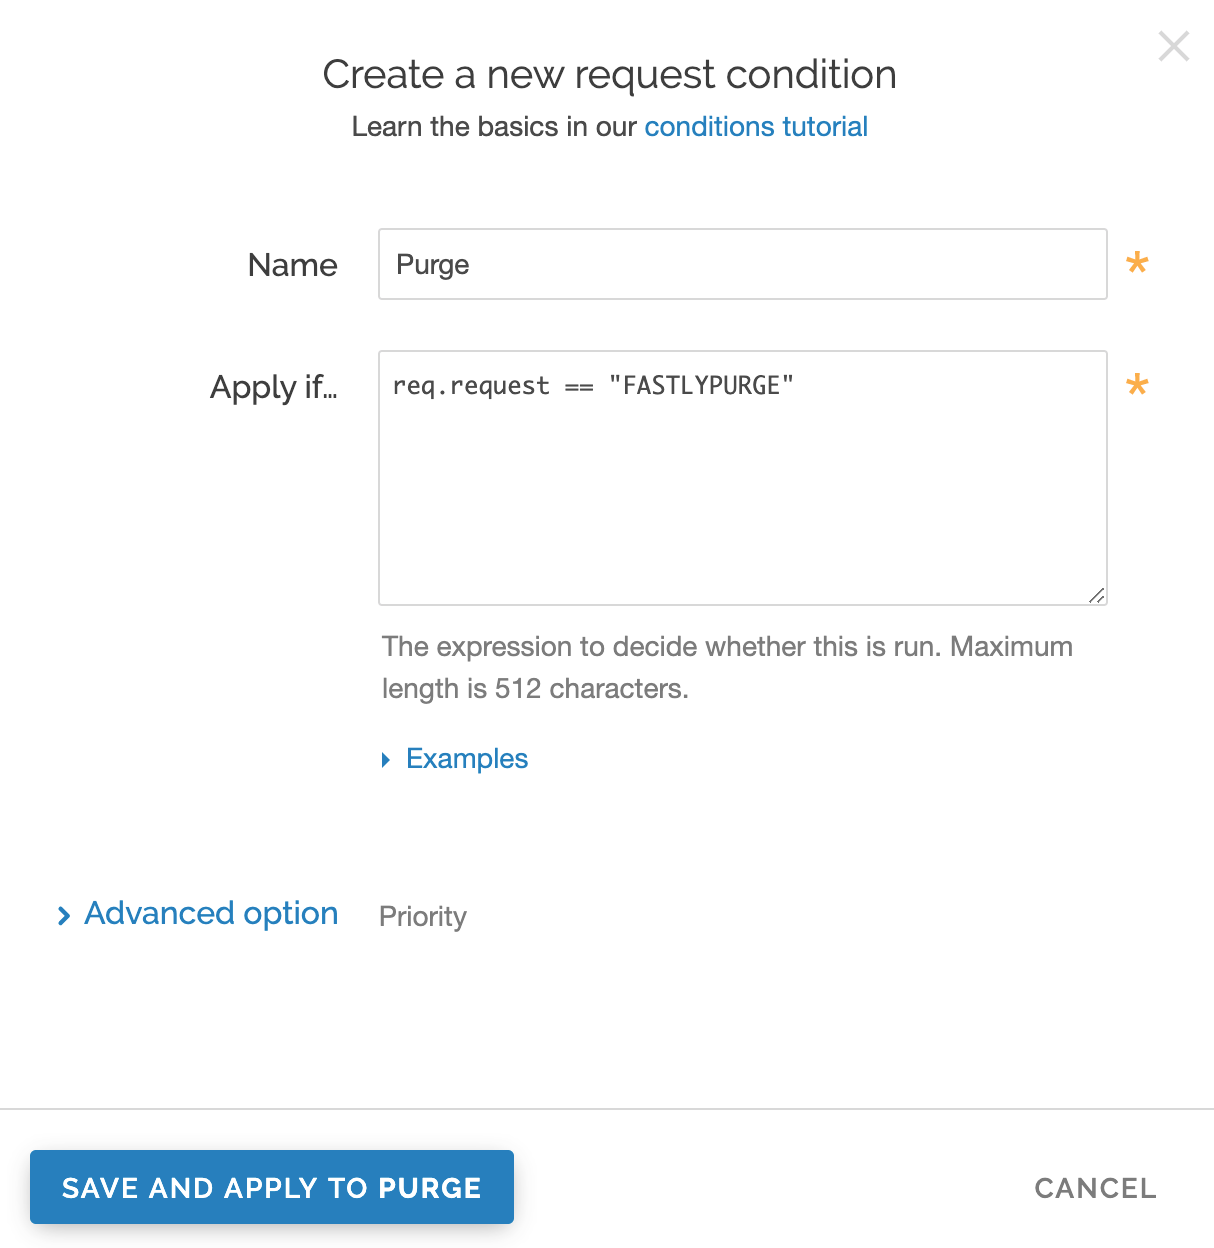 Create a new request condition window